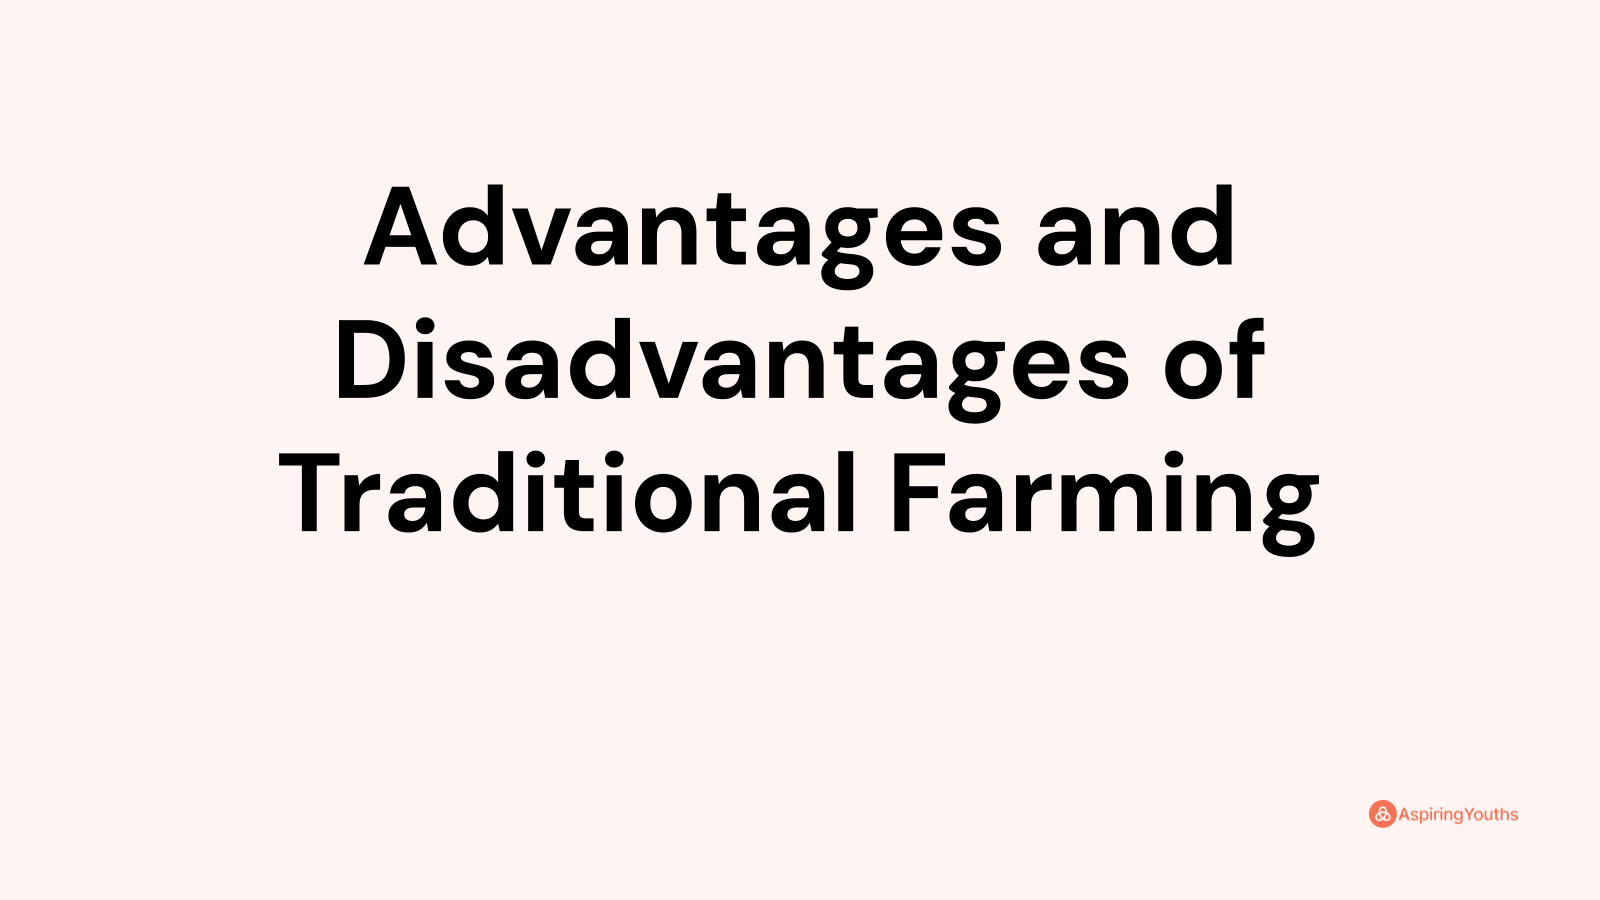 Advantages and disadvantages of Traditional Farming